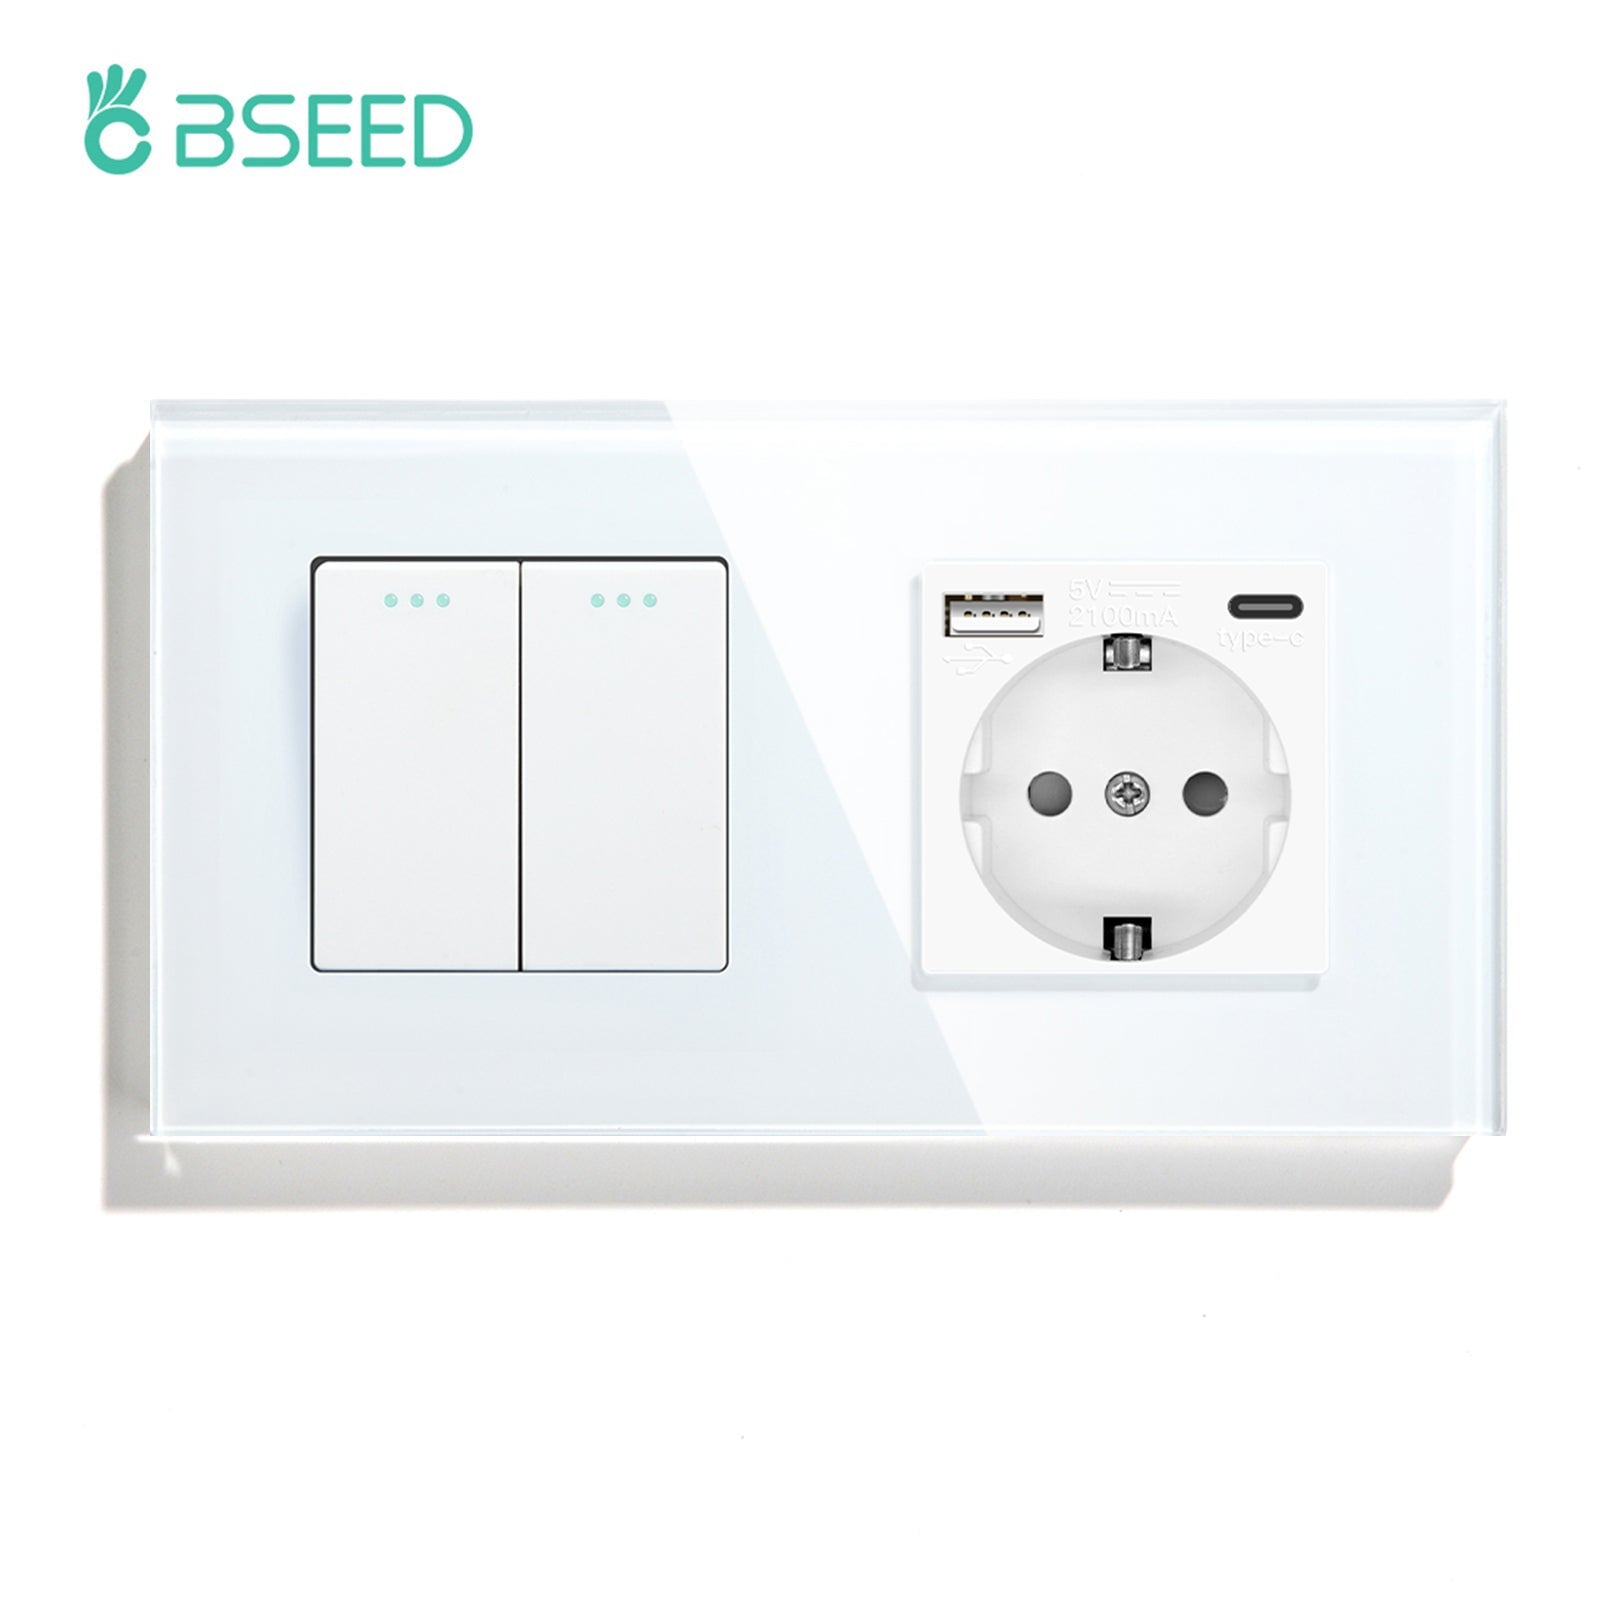 BSEED Mechanical 1/2/3 Gang 1/2Way Touch Light Switch With Normal Eu Socket with typcs-c Power Outlets & Sockets Bseedswitch White 2Gang 1Way